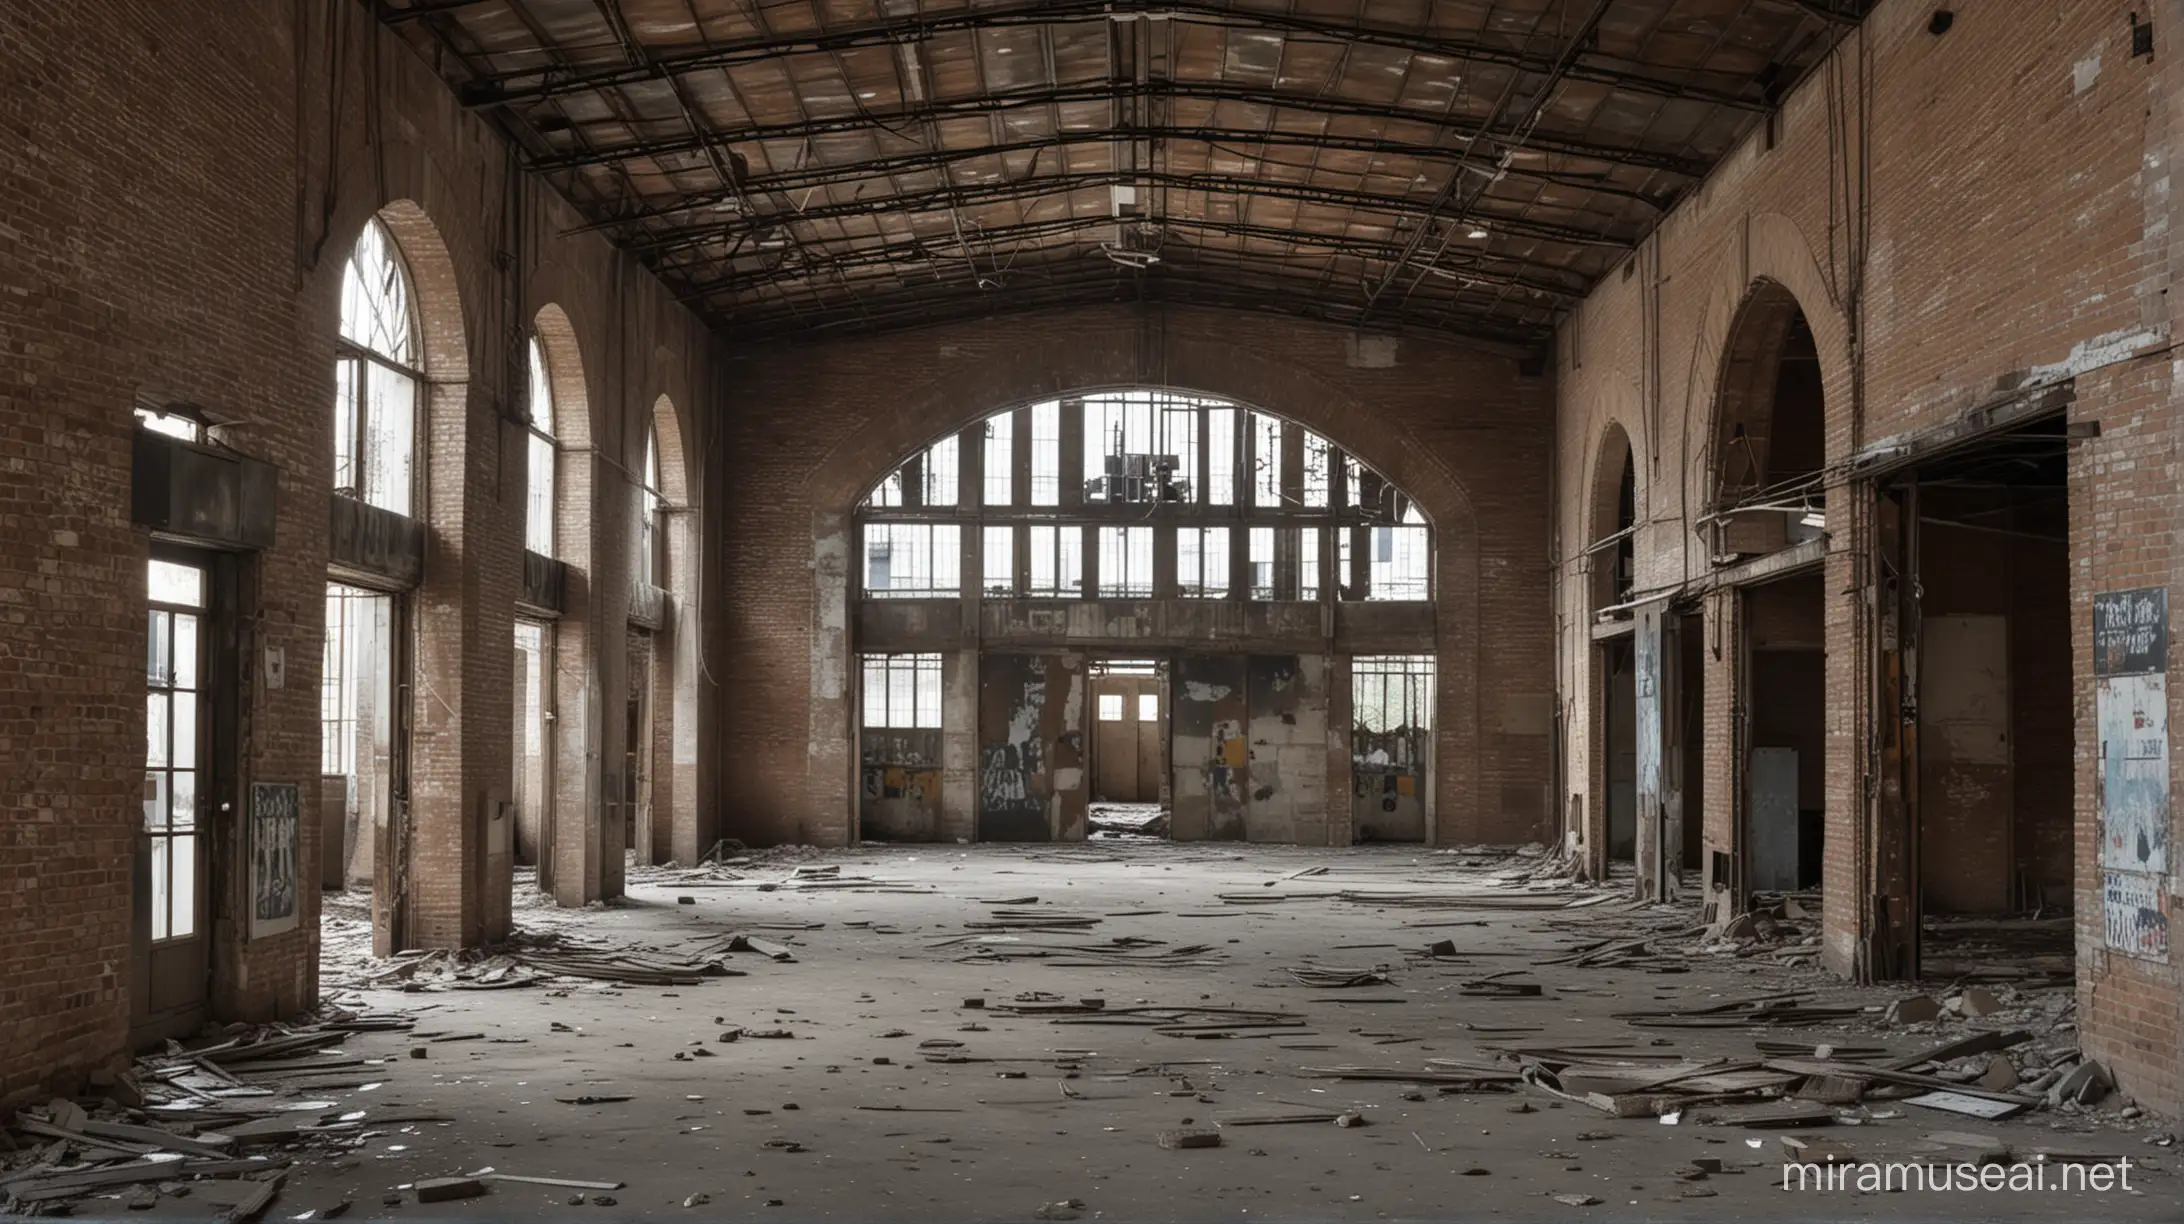 Imagine a vast abandoned industrial hall with a ceiling height of approximately 30 feet, characterized by exposed heavy-duty steel beams. The ceiling, supported by a grid of eight steel columns, shows signs of decay with patches where concrete has crumbled, revealing the metal skeleton within. The floor is a mosaic of old, dirty tiles and scattered debris, with some areas covered in years of accumulated dust and grime. No people are present, lending an eerie quietness to the space. There are three large, arched doorways along one wall, framed by weathered bricks and remnants of old metal doors hanging off their hinges.